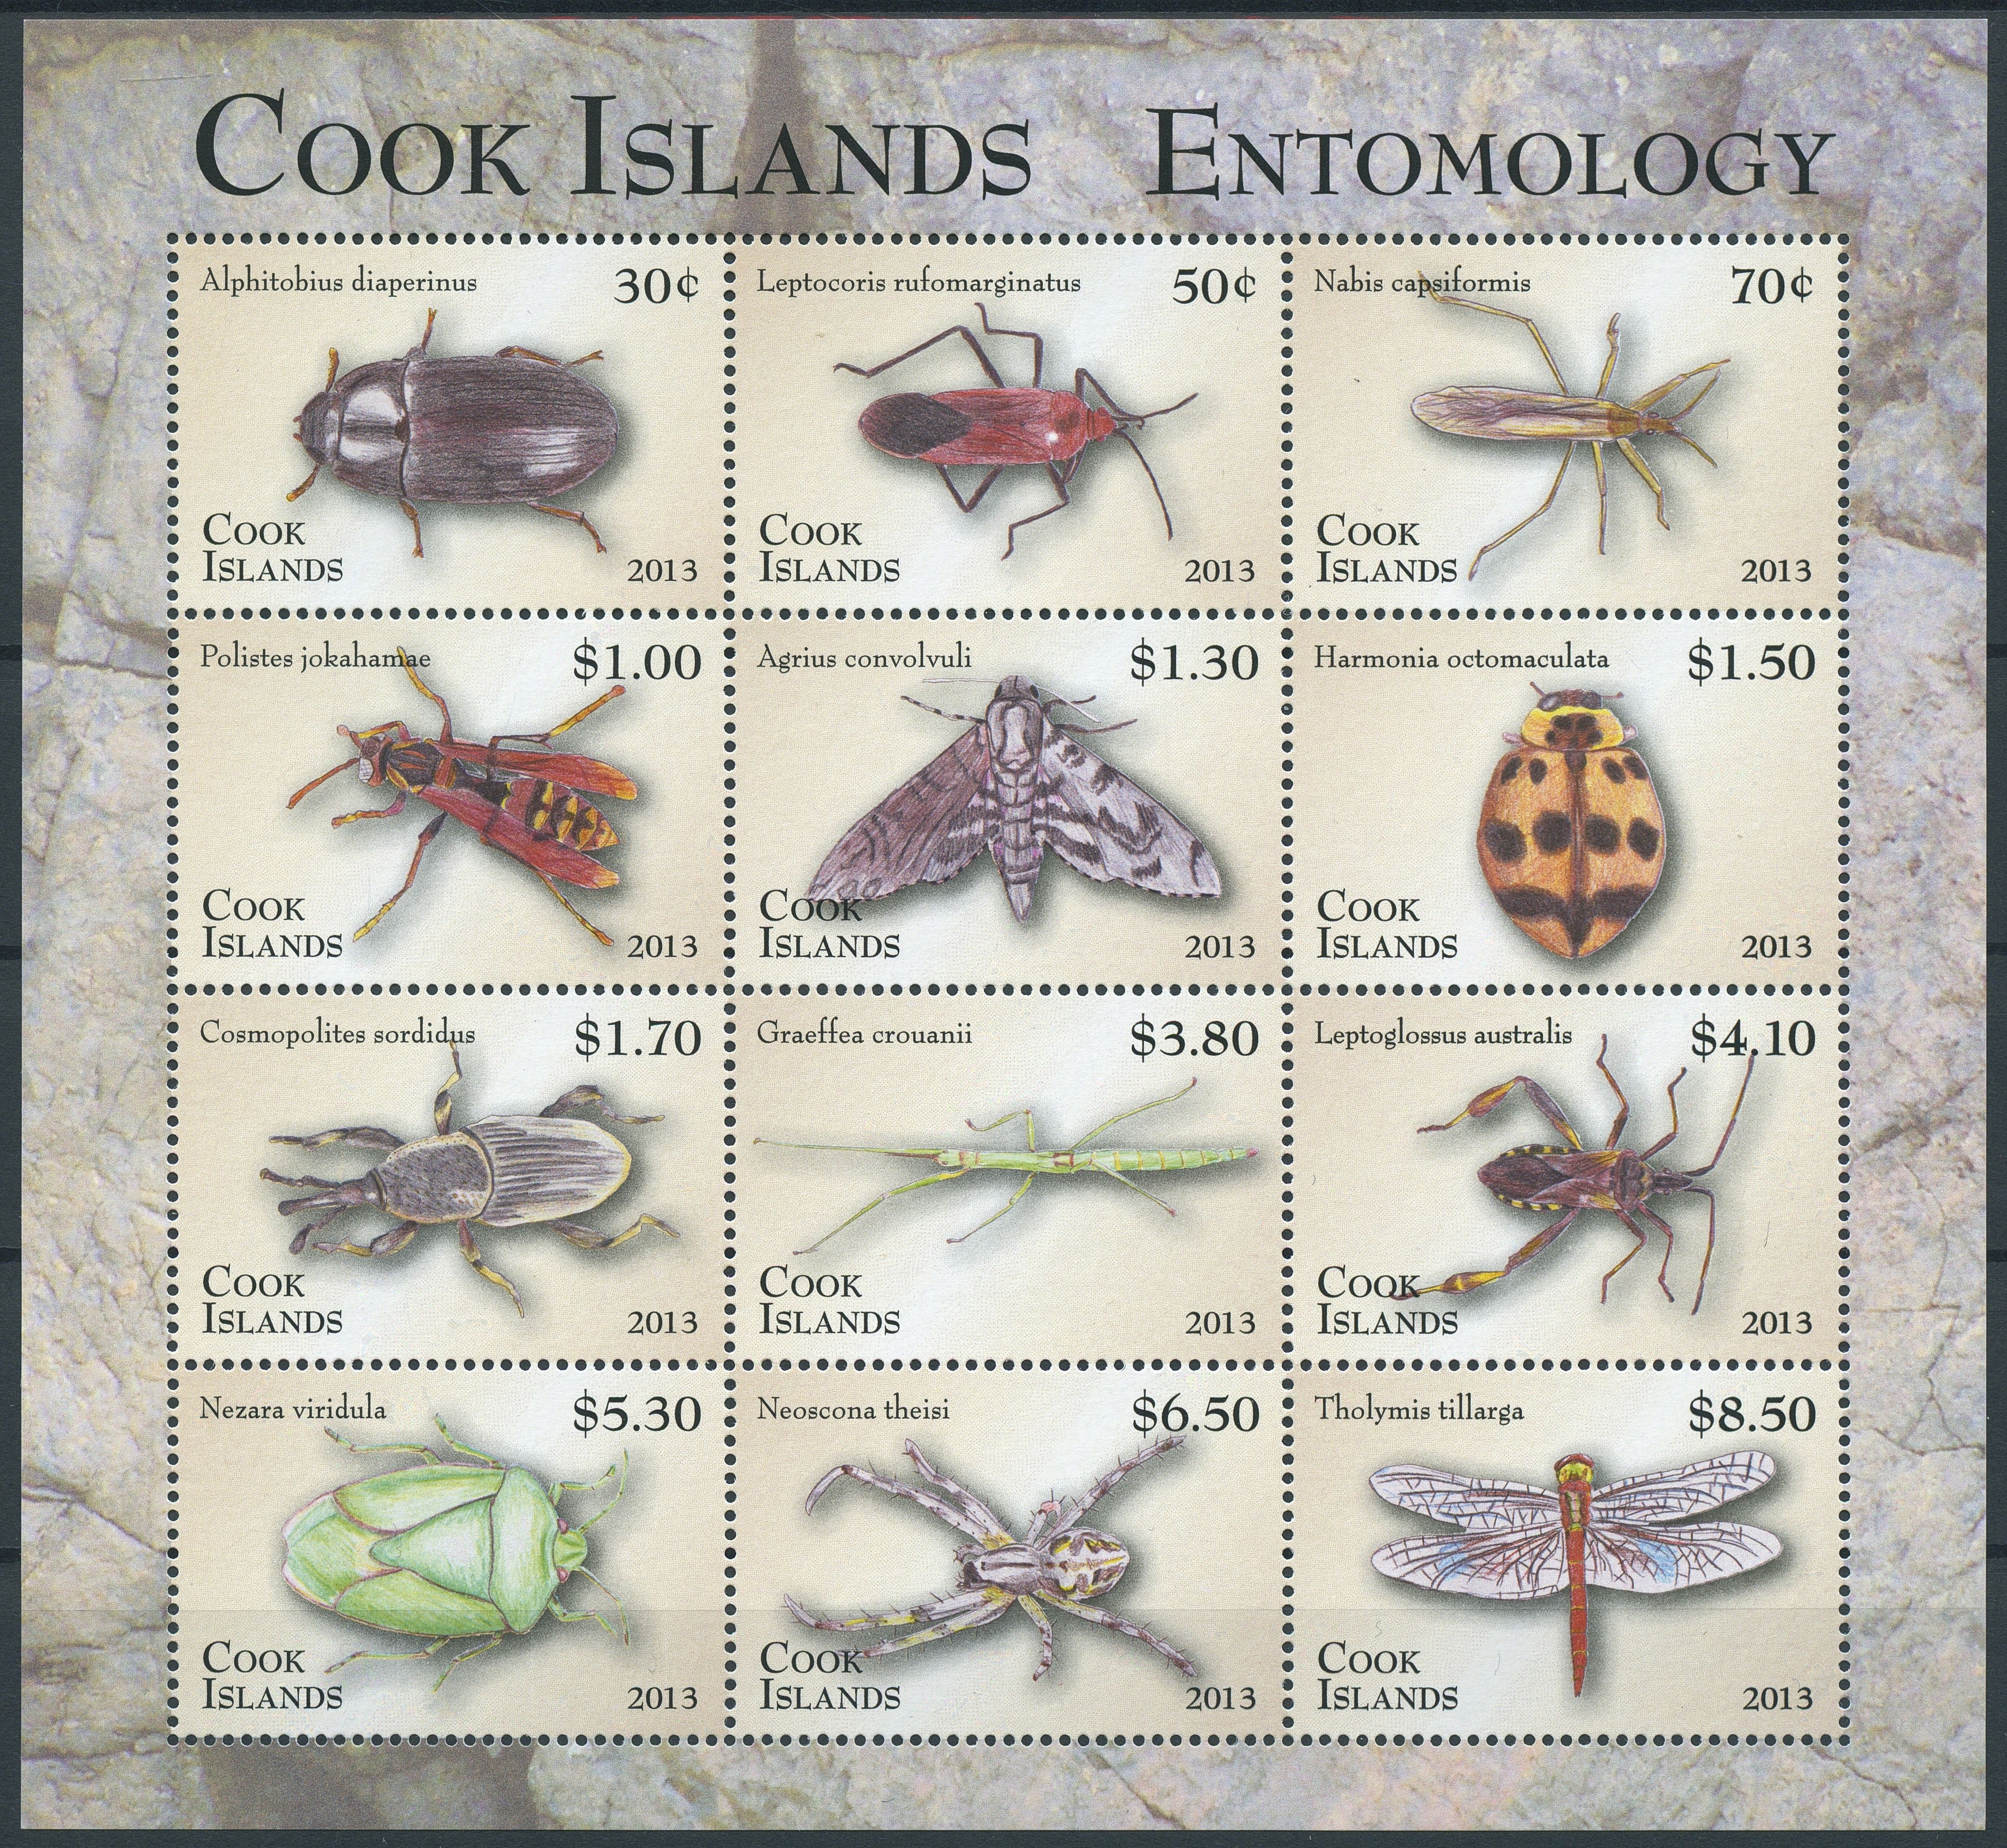 Cook Islands 2013 MNH Entomology Definitive Part 1 12v M/S Insects Beetles Moth